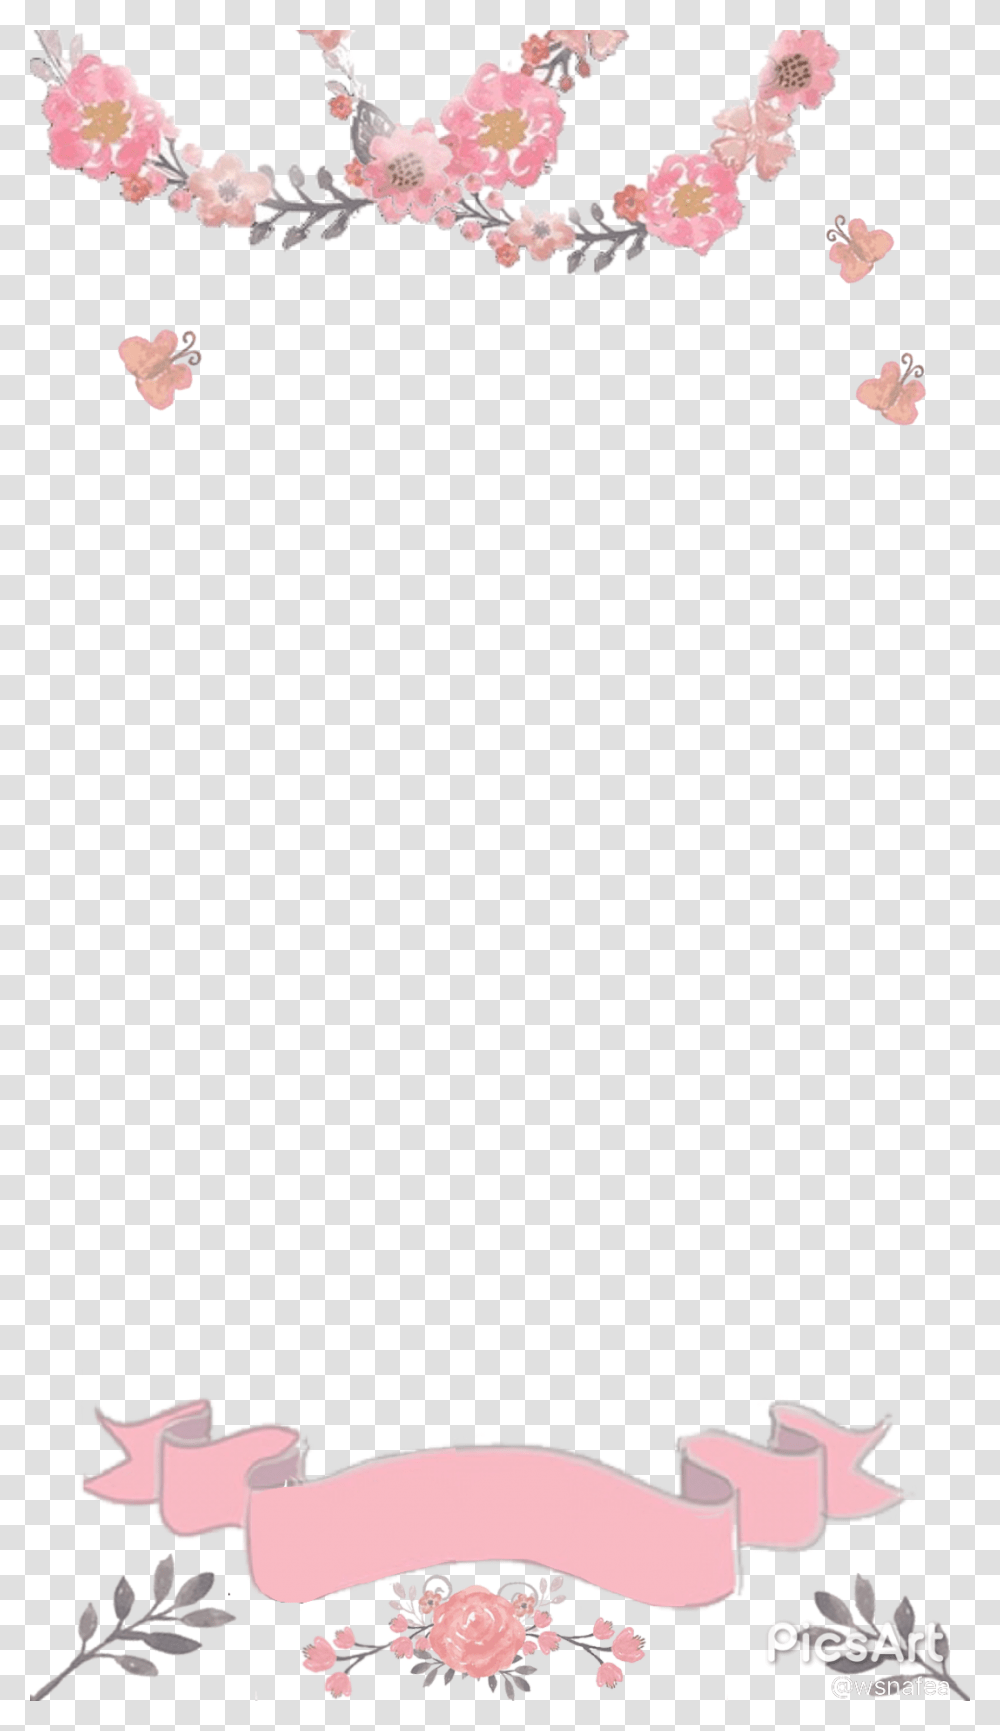 Snapchat Hearts Border Backgrounds, Outdoors, Nature, Astronomy, Outer Space Transparent Png